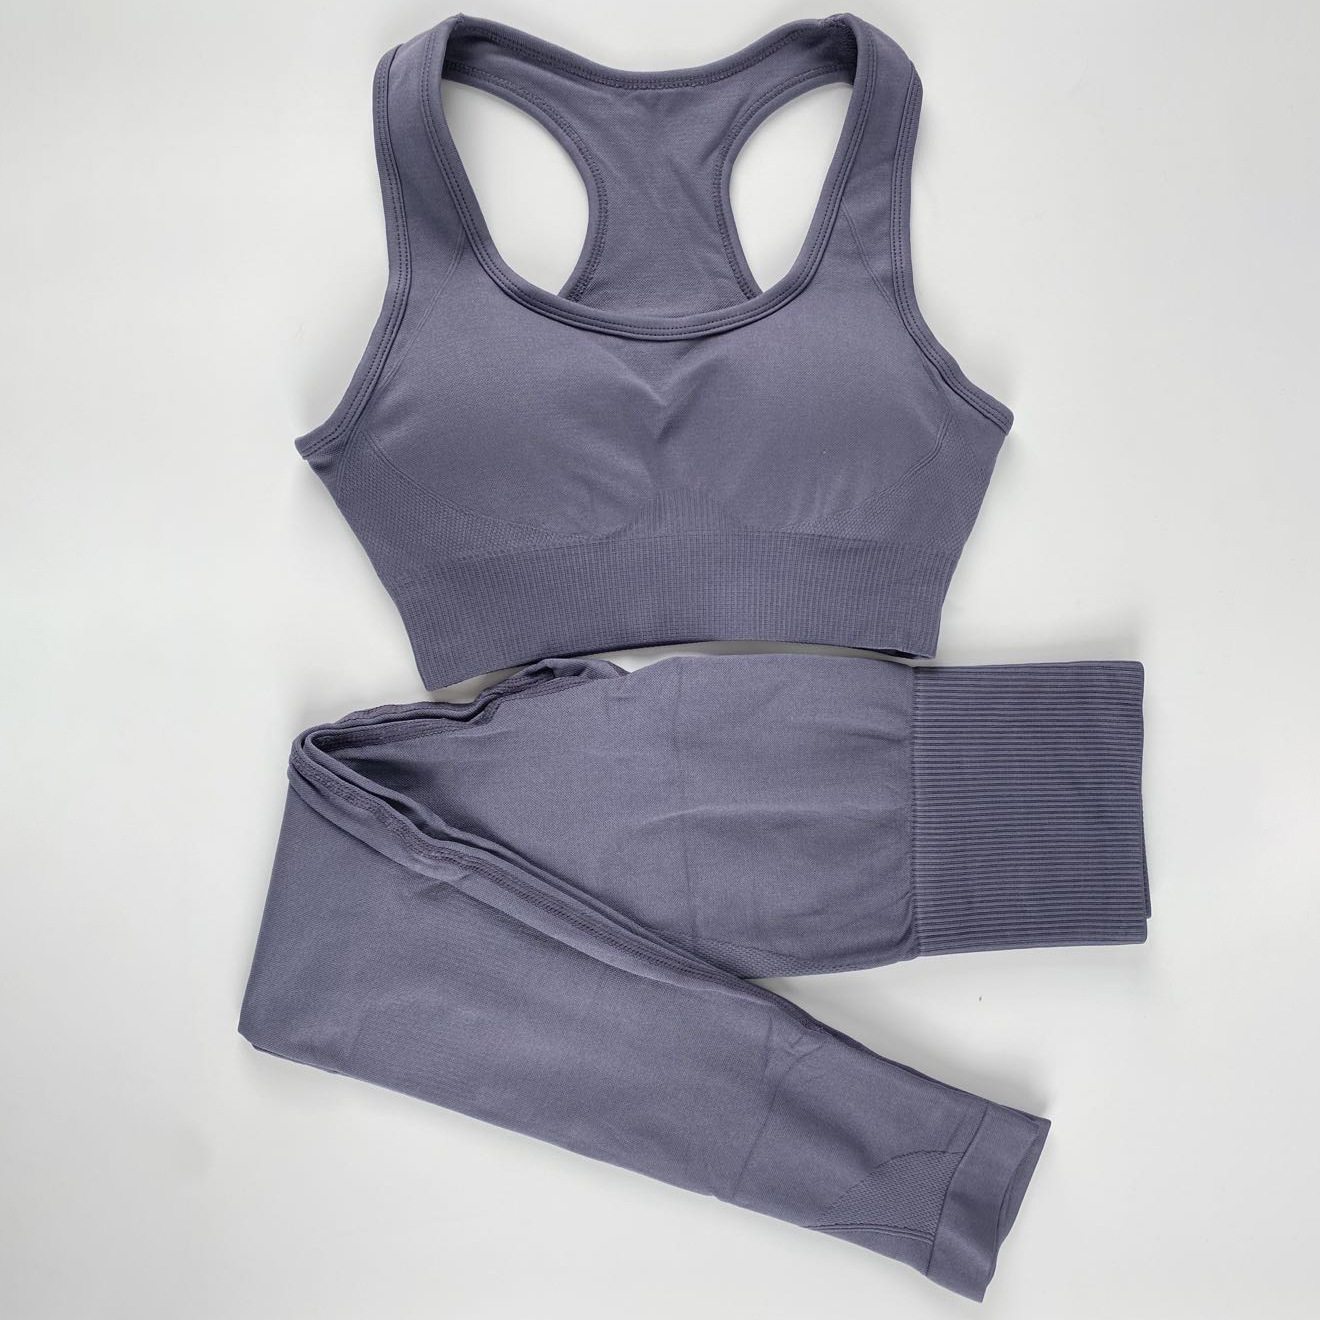 Seamless Knitted Sports Yoga Suit NSNS23587